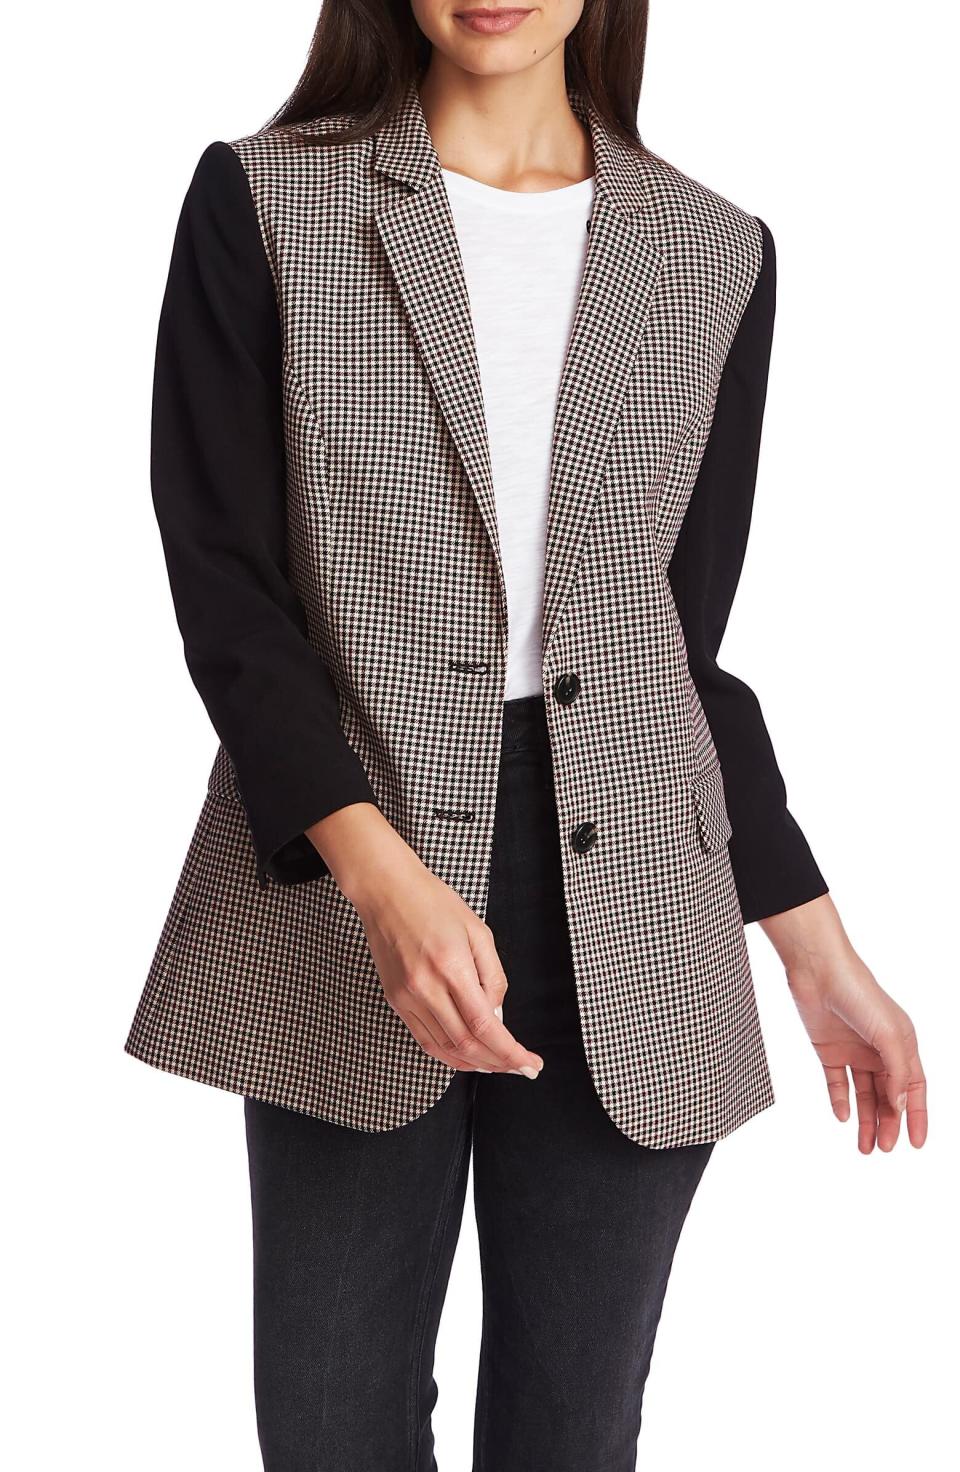 This blazer brings power dressing&nbsp;to the modern era. <a href="https://fave.co/35qvK7e" target="_blank" rel="noopener noreferrer"><strong>Find this blazer at Nordstrom</strong></a>. (Photo: Nordstrom )